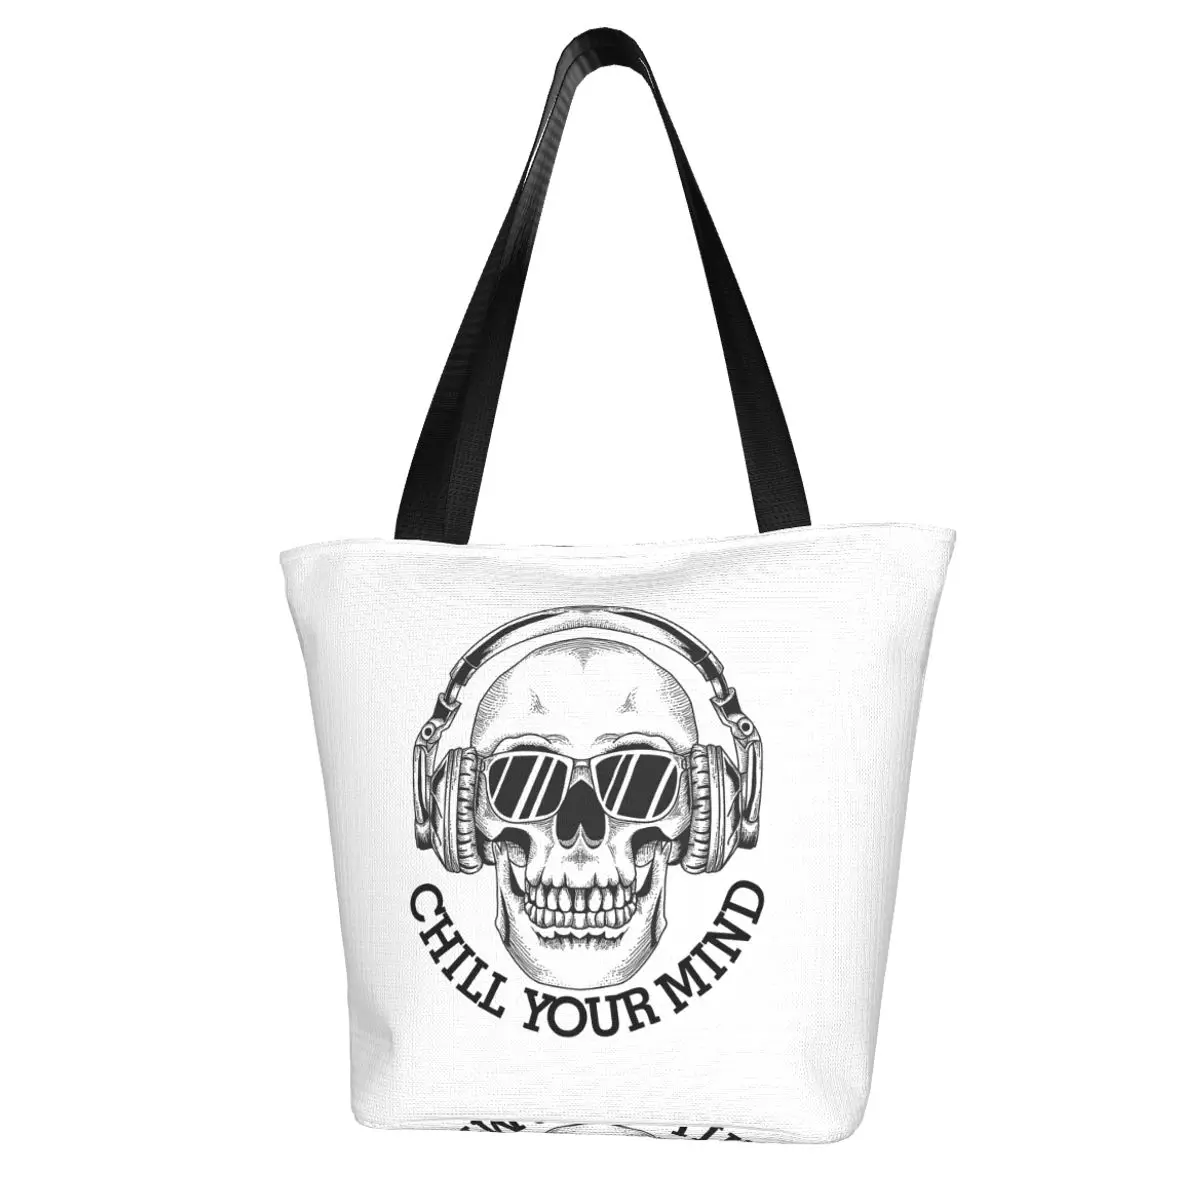 Chill Your Mind Music Skull Shopping Bag Aesthetic Cloth Outdoor Handbag Female Fashion Bags